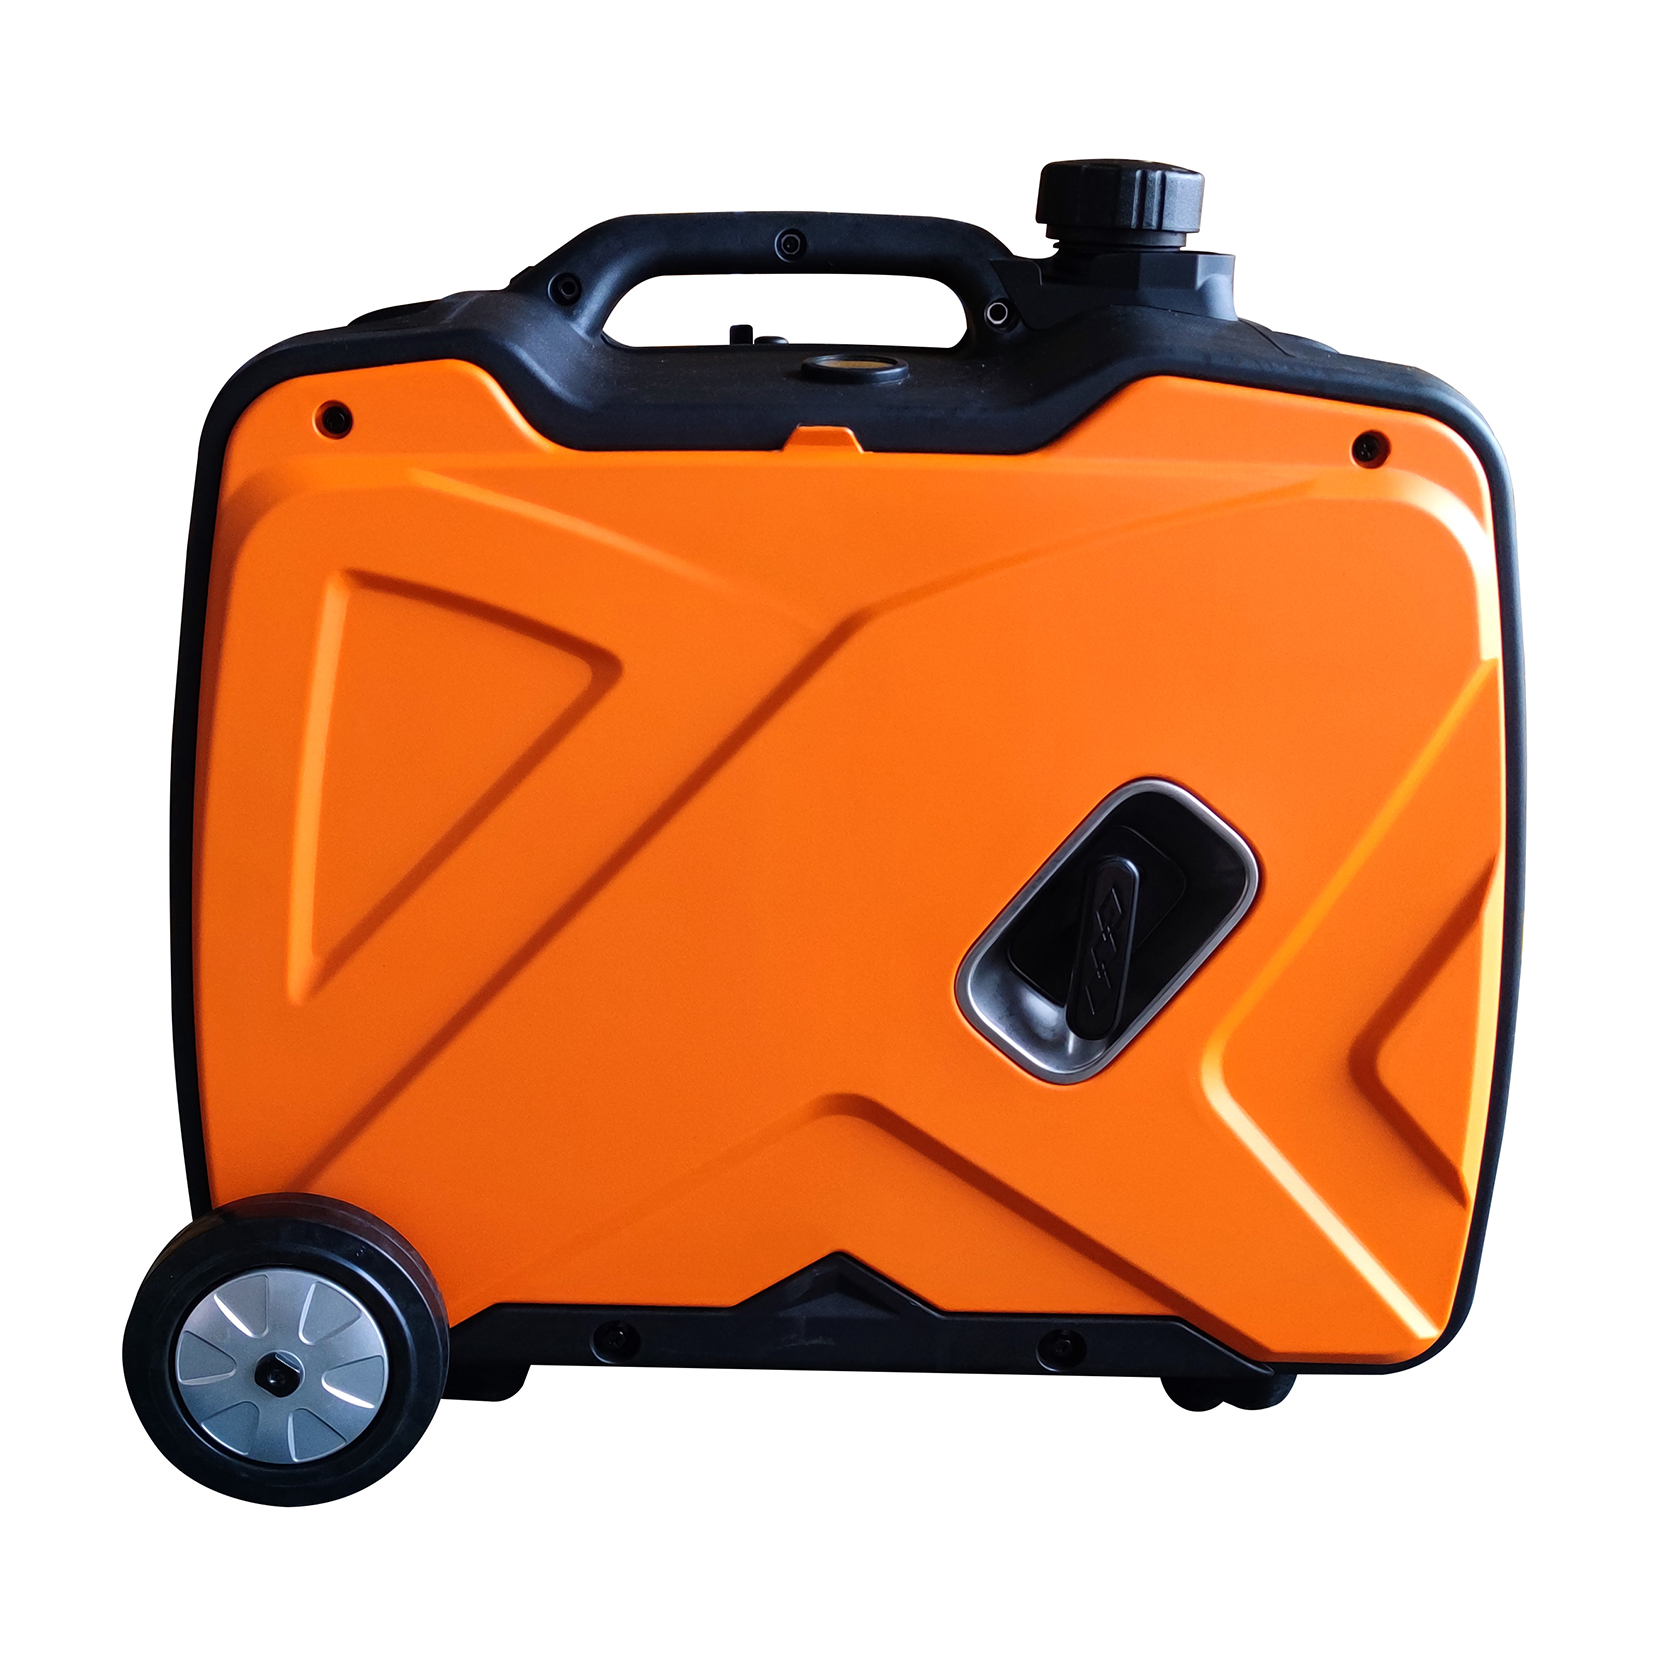 App Monitor Camping Gasoline Inverter Generator with Handle